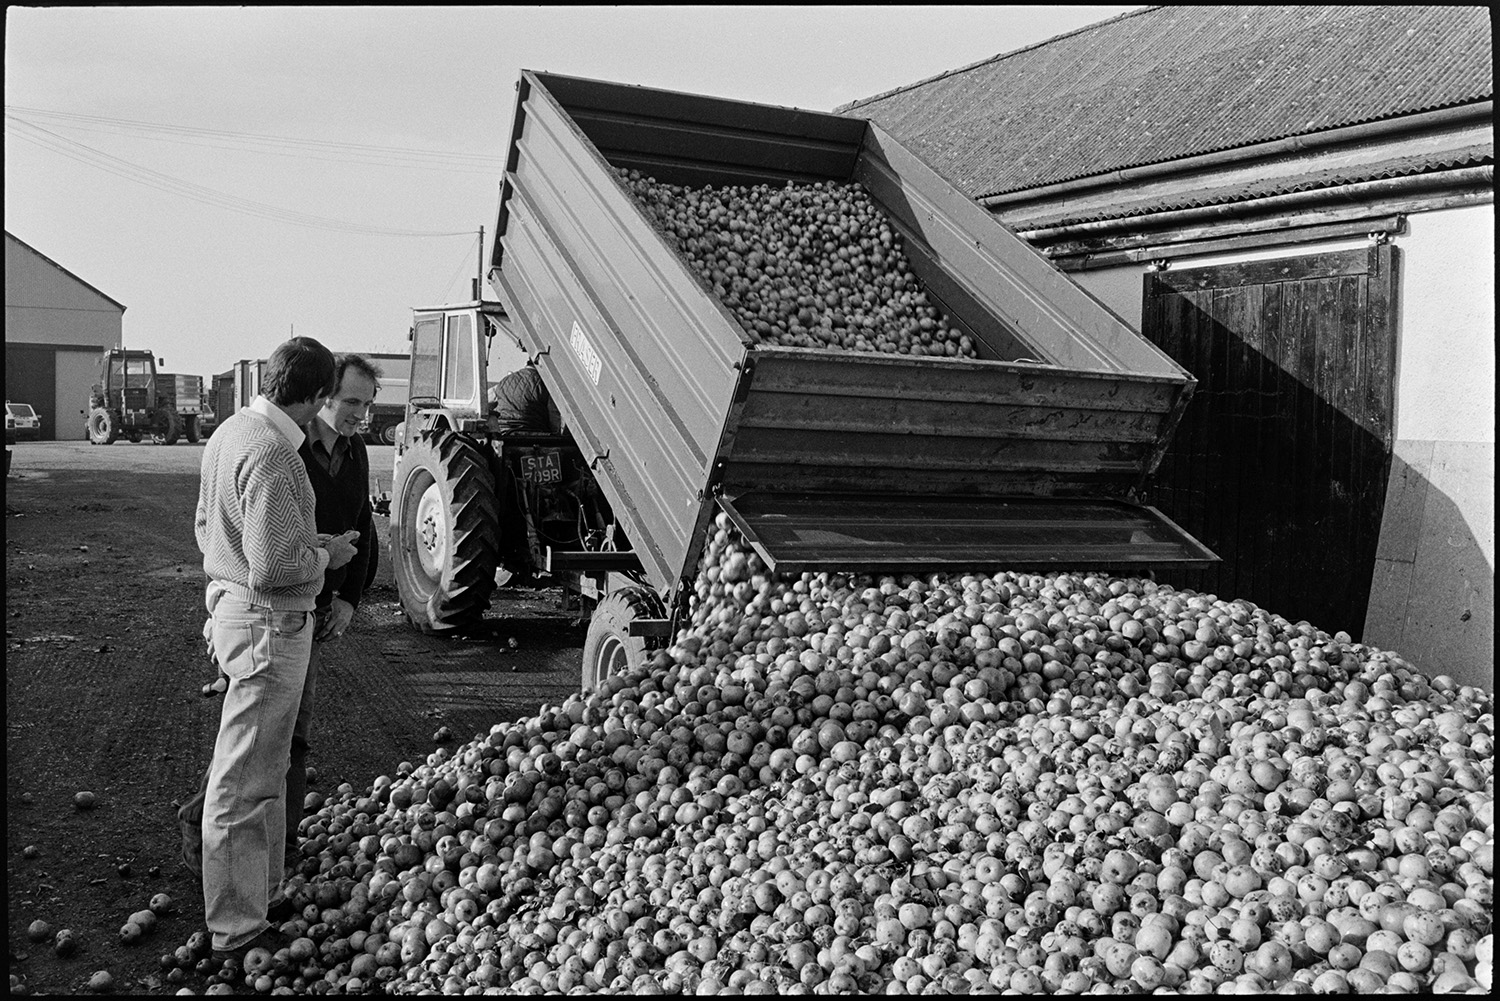 Orchards, Devon, cider press in factory, apples arriving on trailer. 
[A tractor and trailer delivering a load of apples outside a barn at Sam inch's cider factory in Winkleigh.]